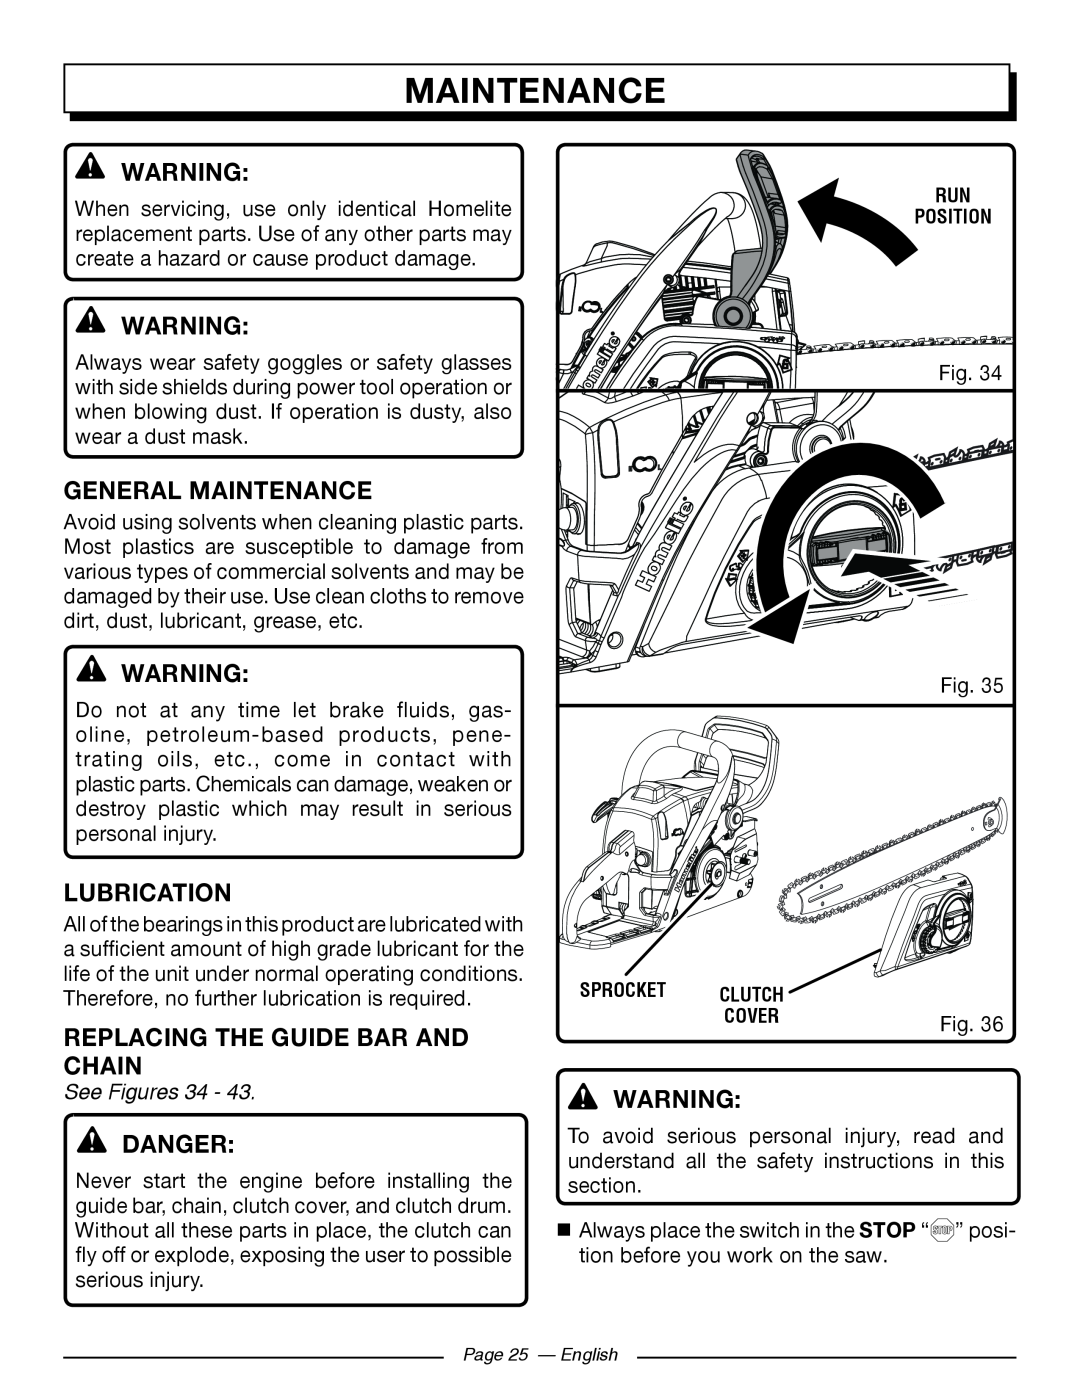 Homelite UT10585 maintenance, General Maintenance, Lubrication, REPLACING THE guide BAR AND CHAIN, Danger, See Figures 34 